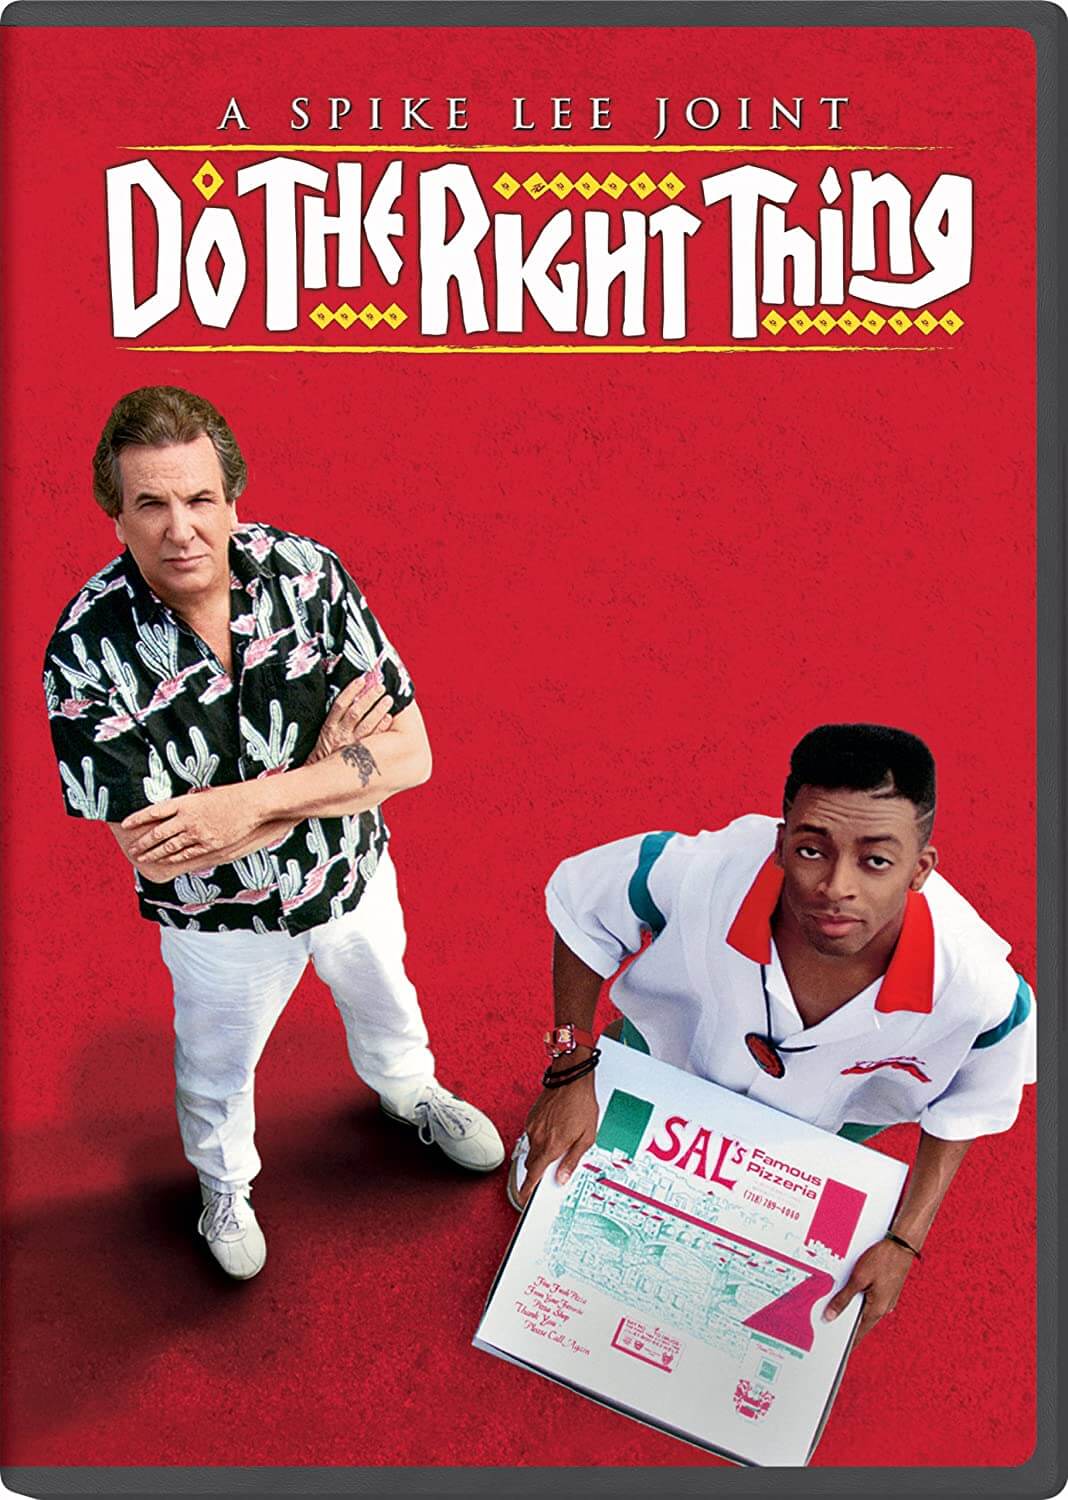 Do The Right Thing - Featured Image - Films - RetroWitch Film Blog